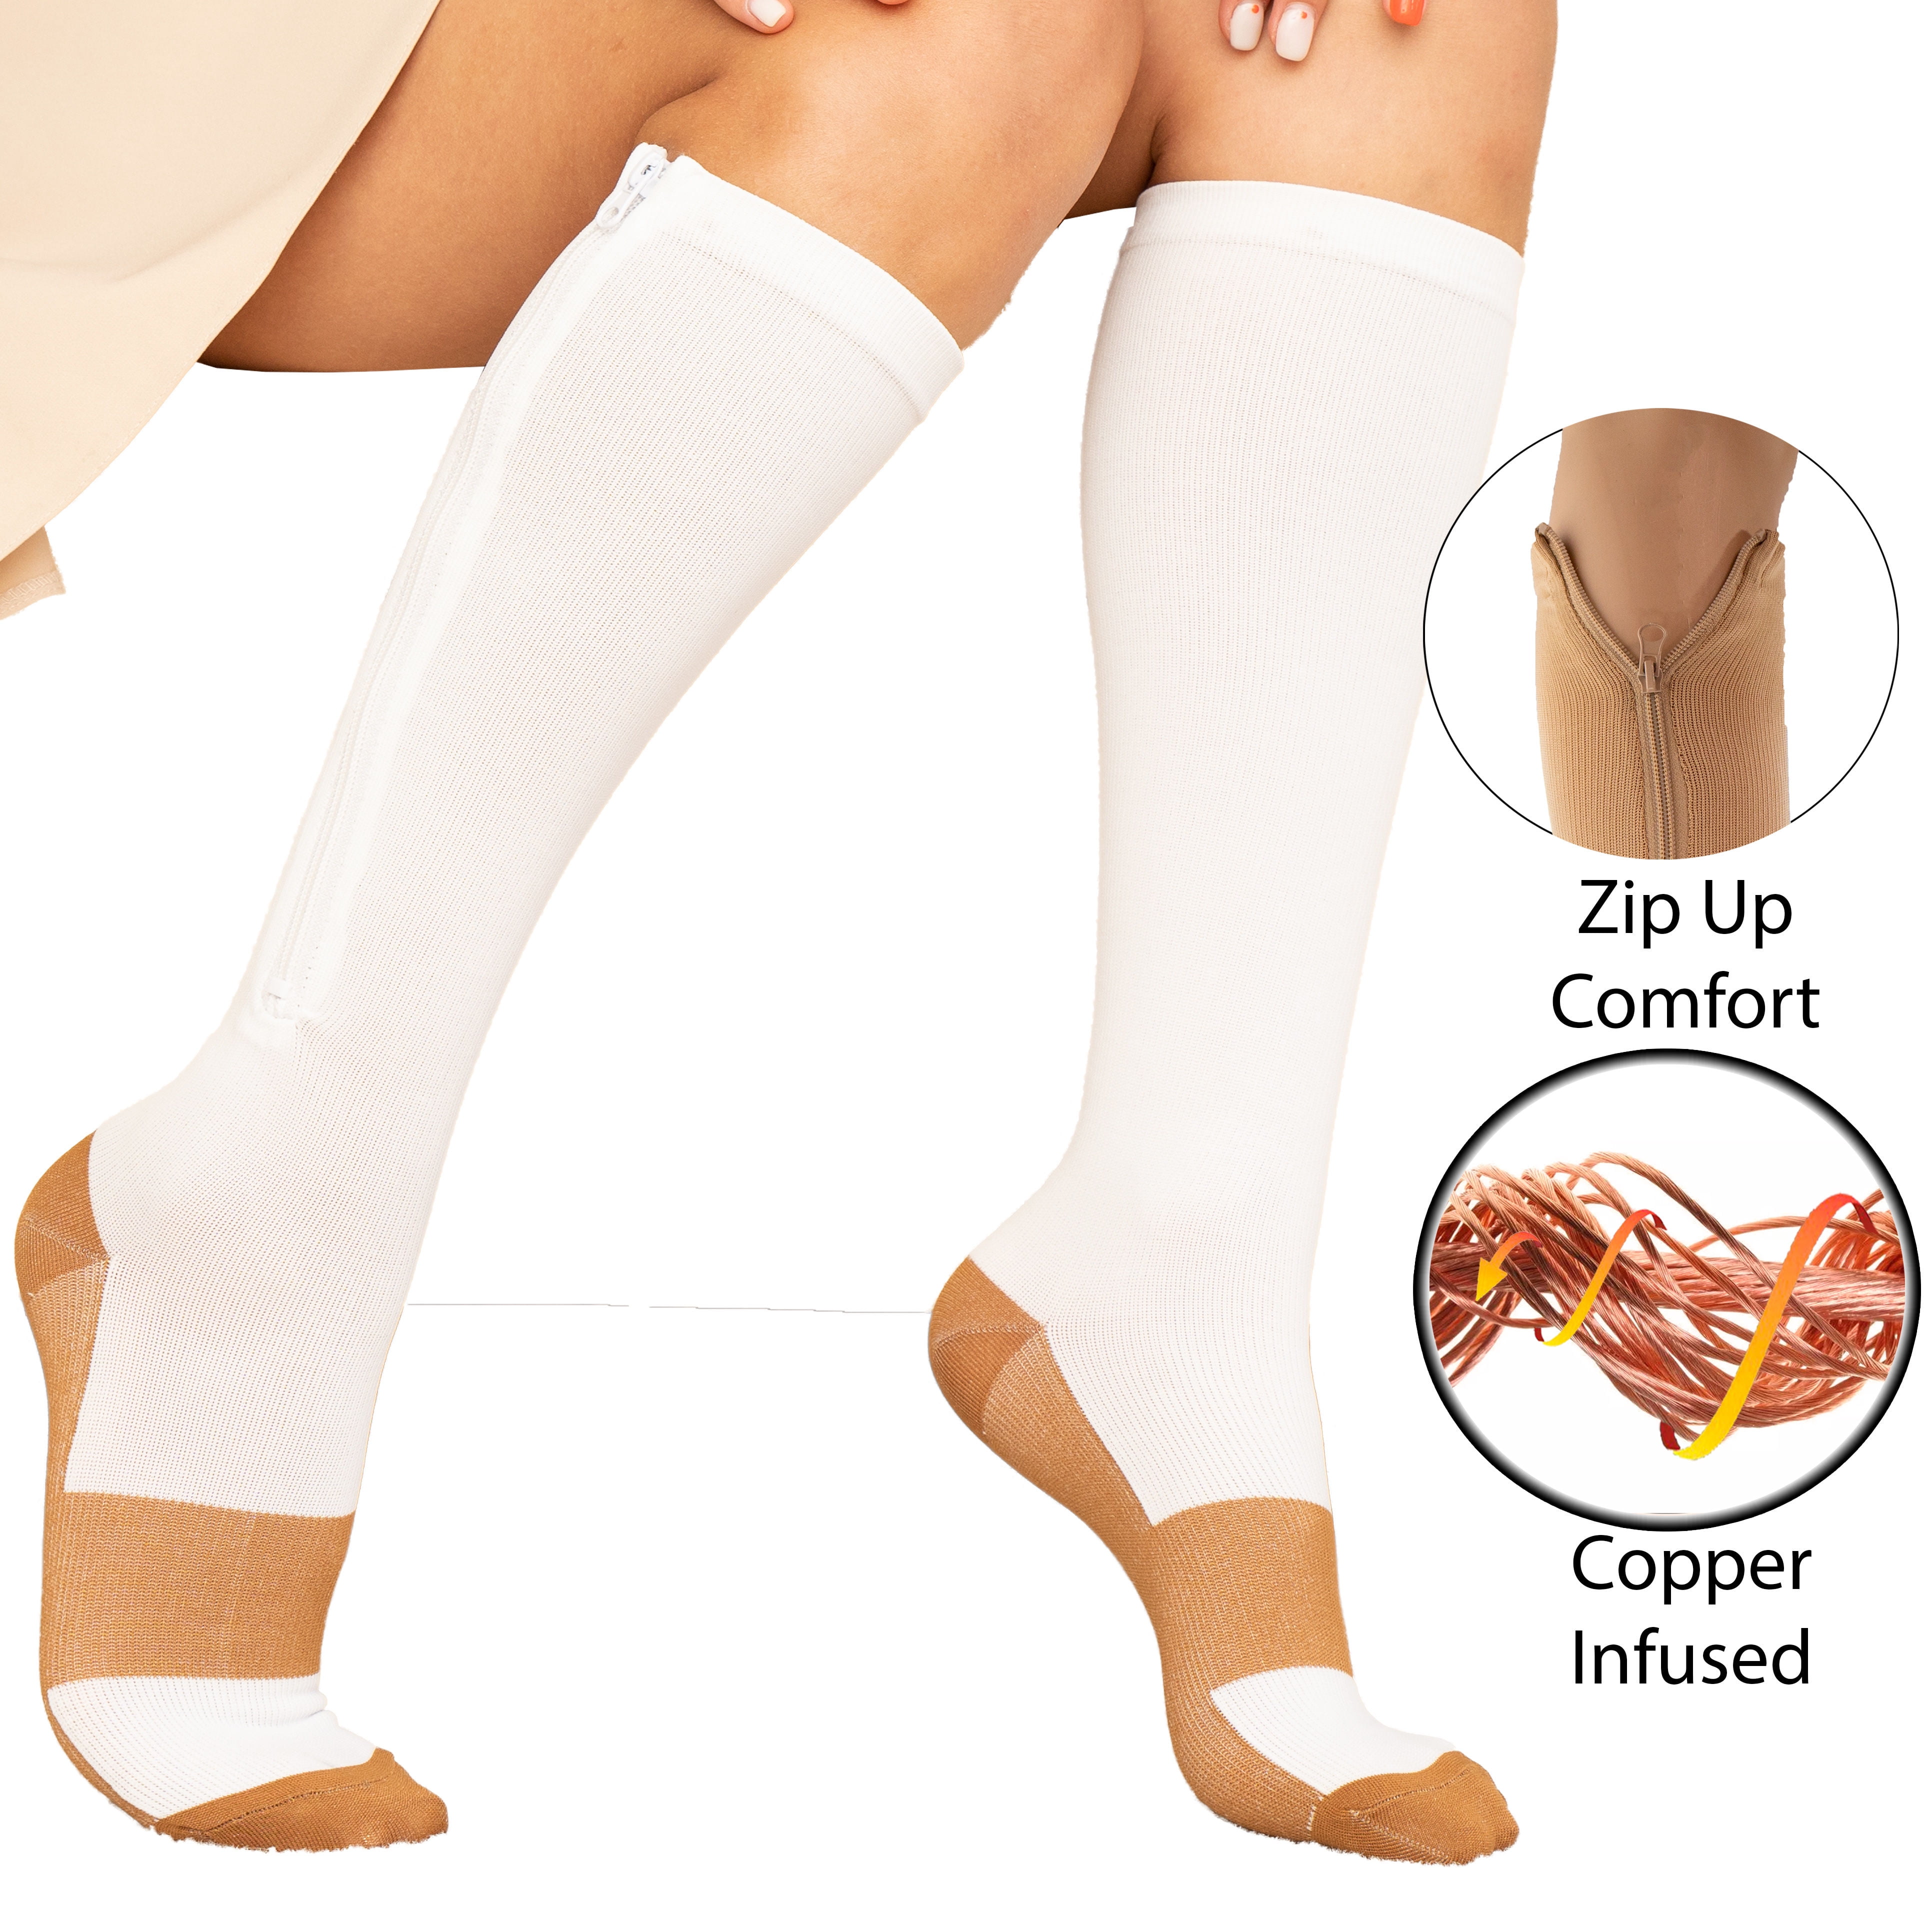 Details about    Copper Compression Stockings 20-30mmHg Support Socks Men's Women'sS-XXL 6Pairs 